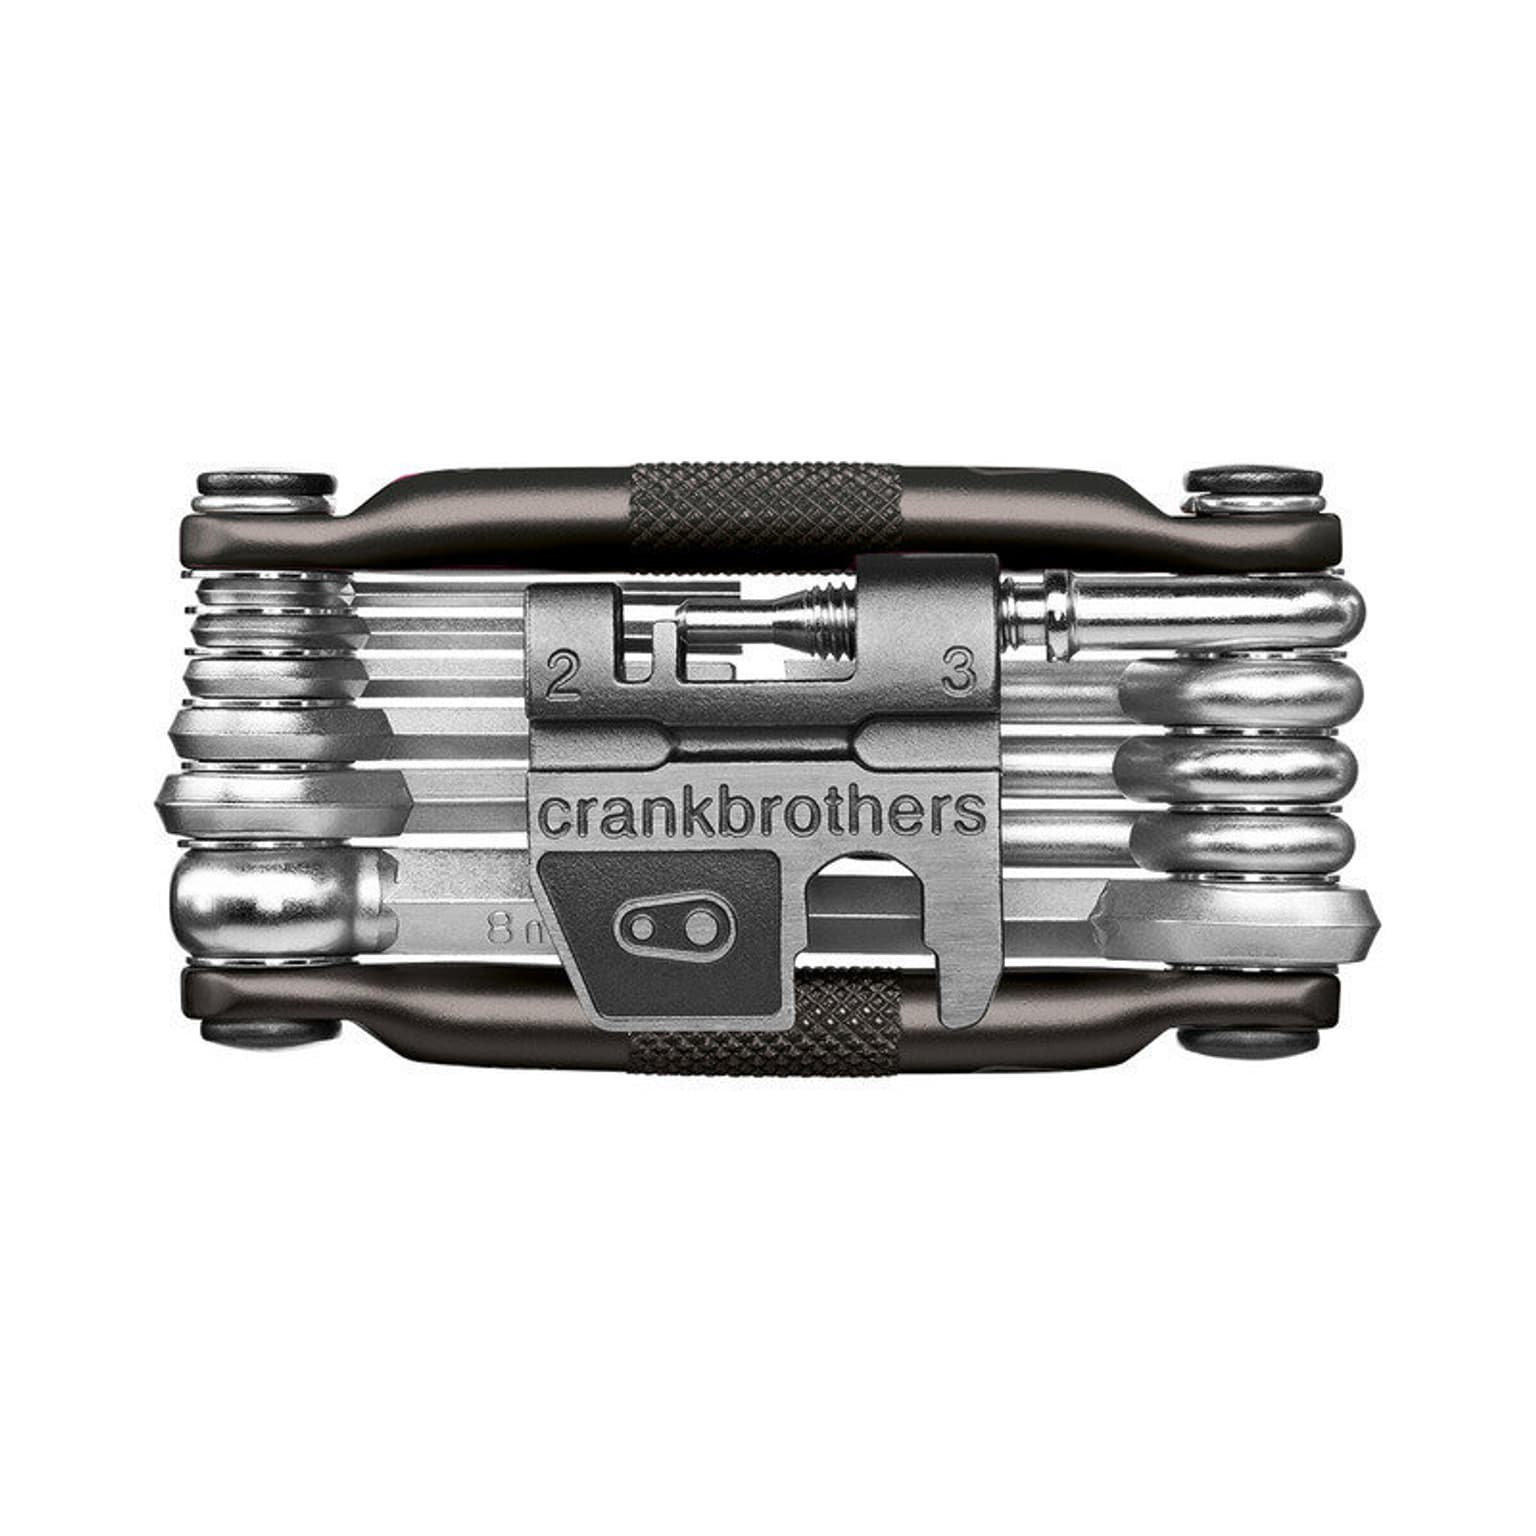 crankbrothers crankbrothers Multitool 17 midnight edition Jeu d'outils pour bicyclette 1